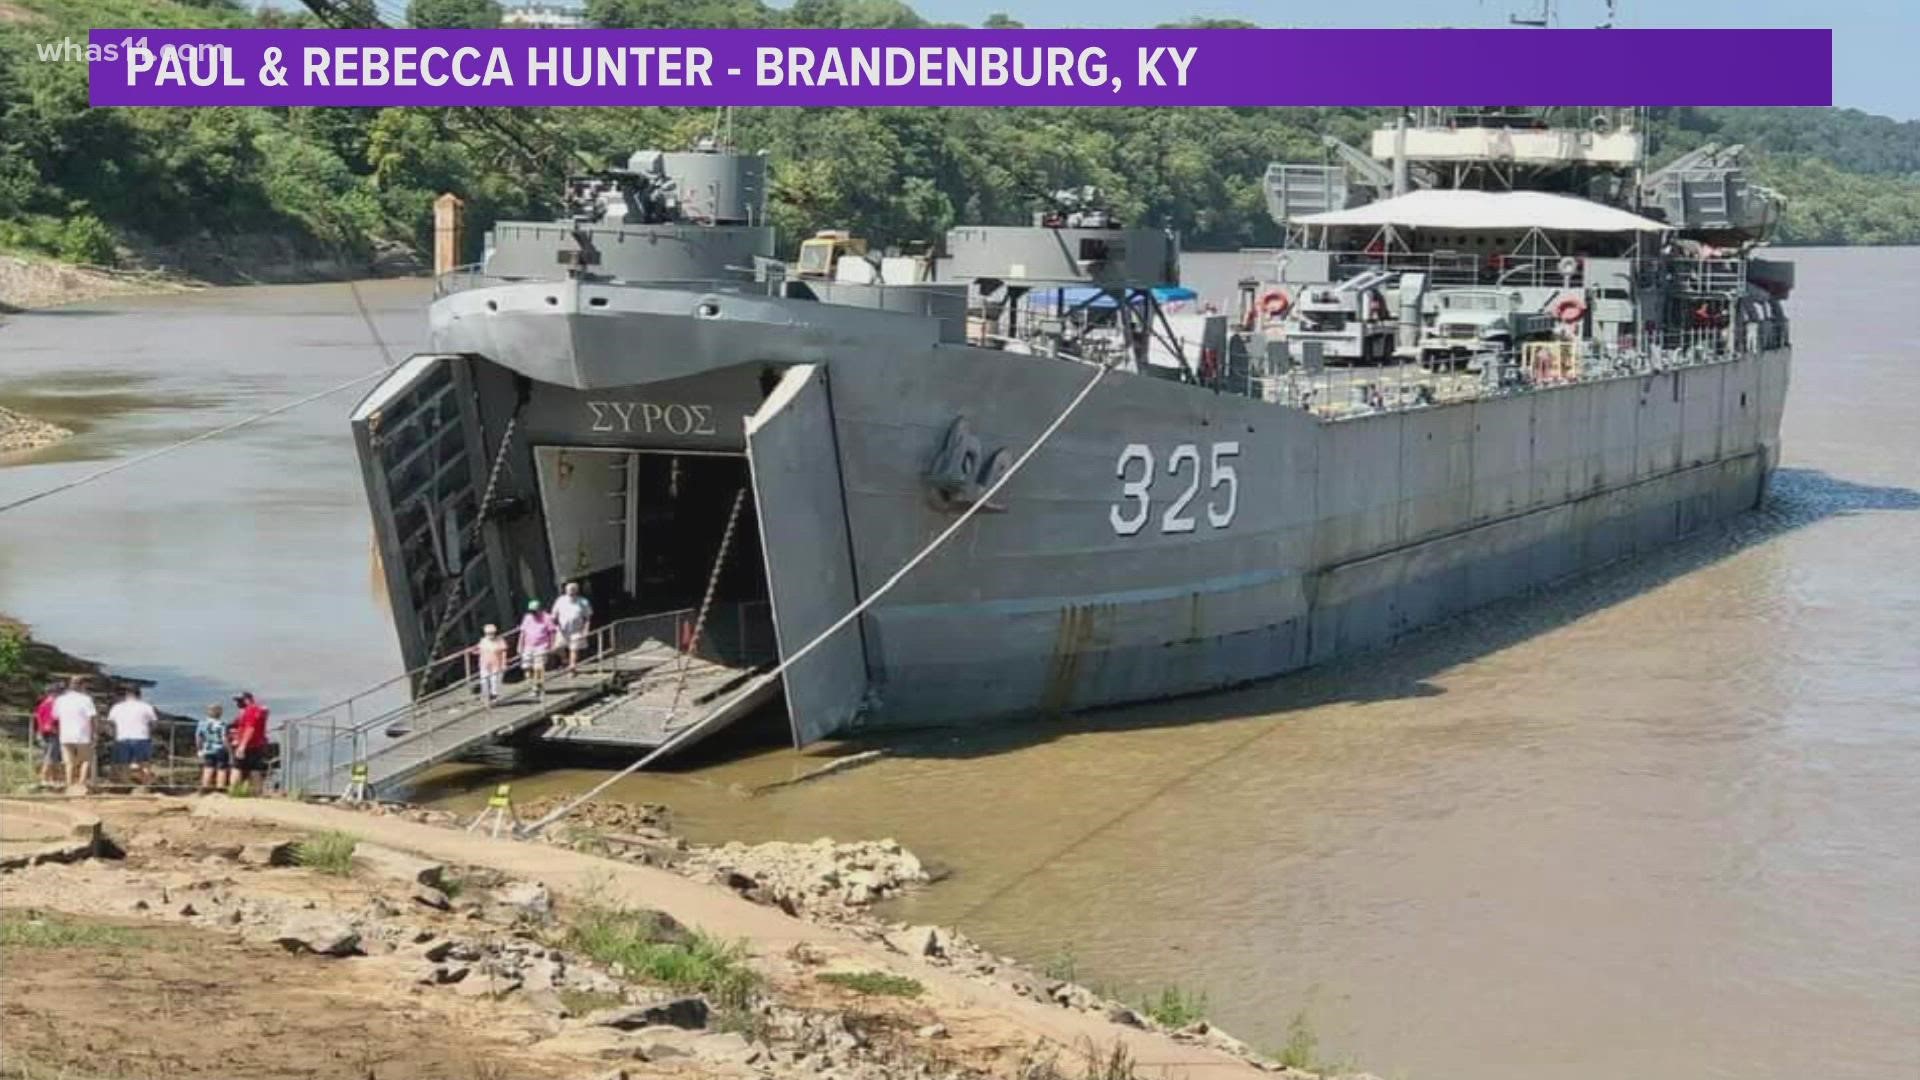 The LST-325, the last fully operational WWII Landing Ship Tank, is docking in Brandenburg's Riverfront Park until Sept. 6.